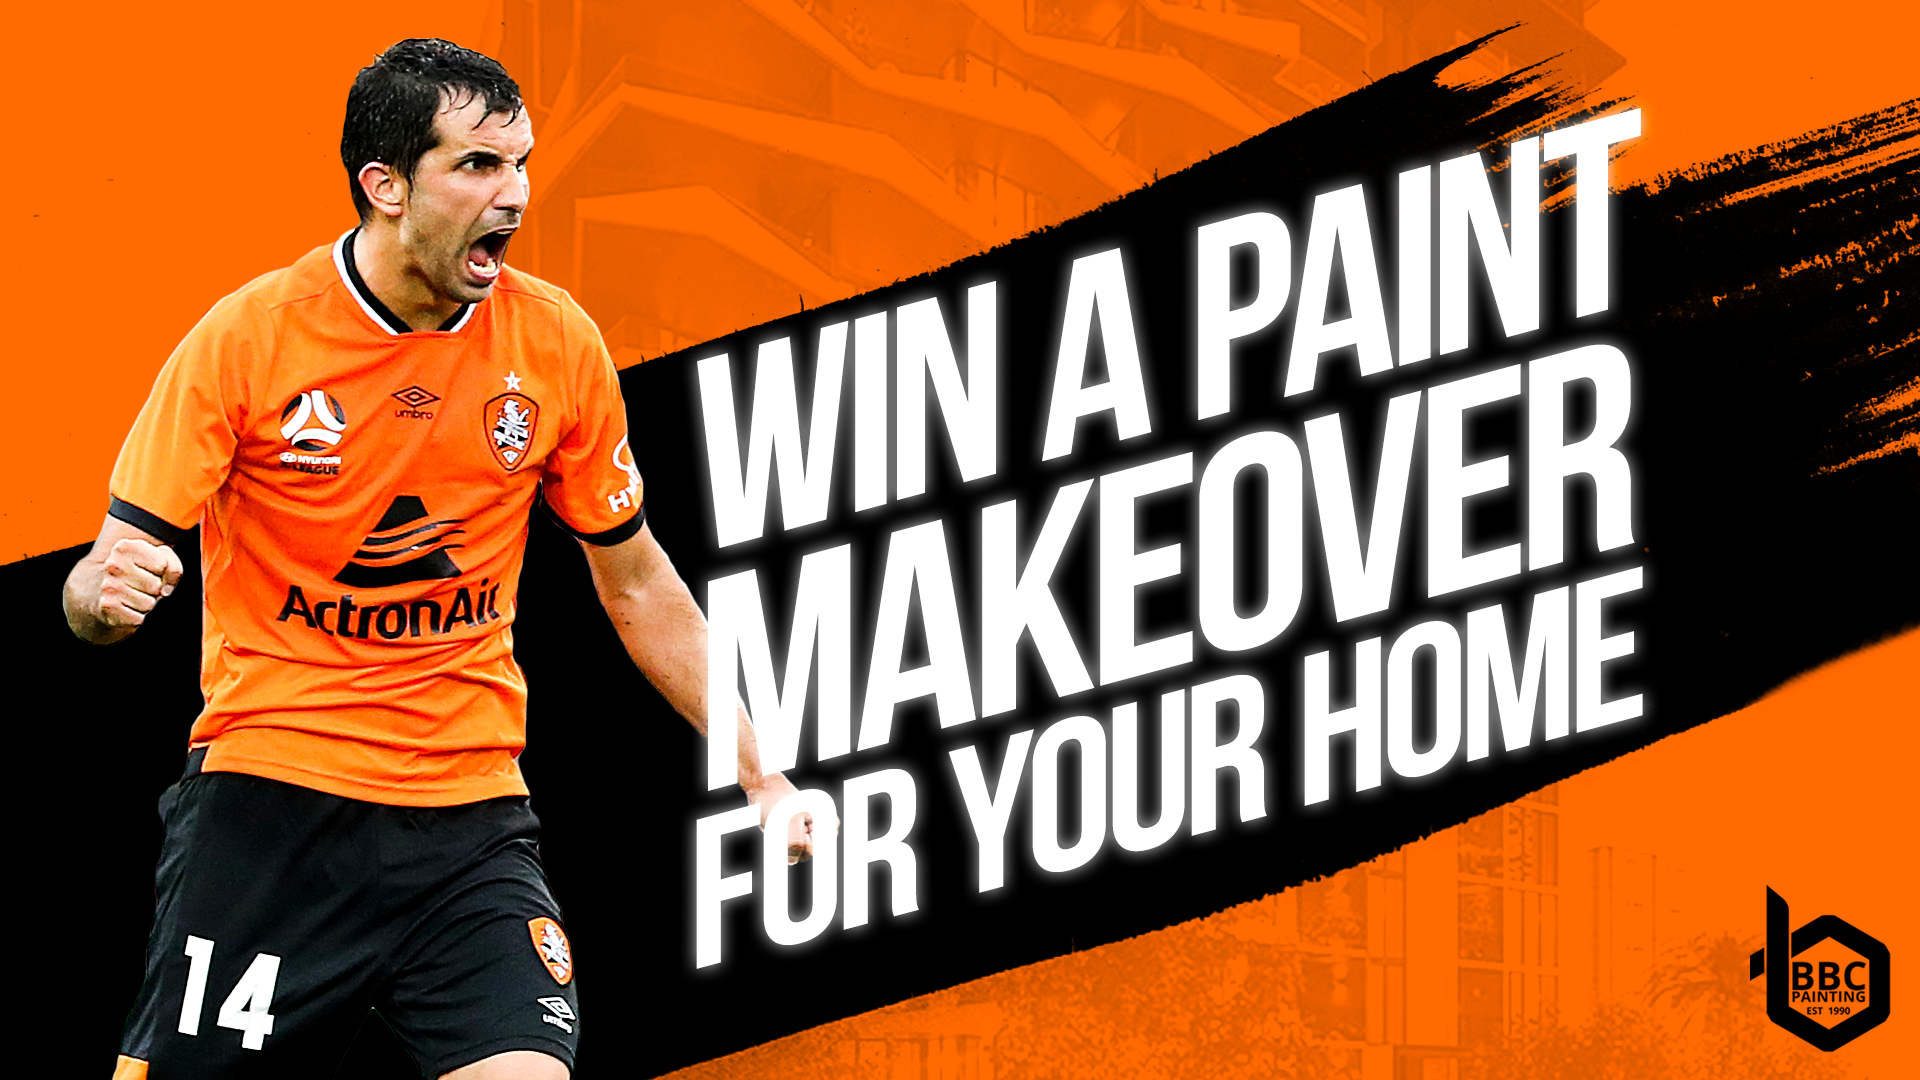 Win a paint makeover for your home thanks to BBC Painting!